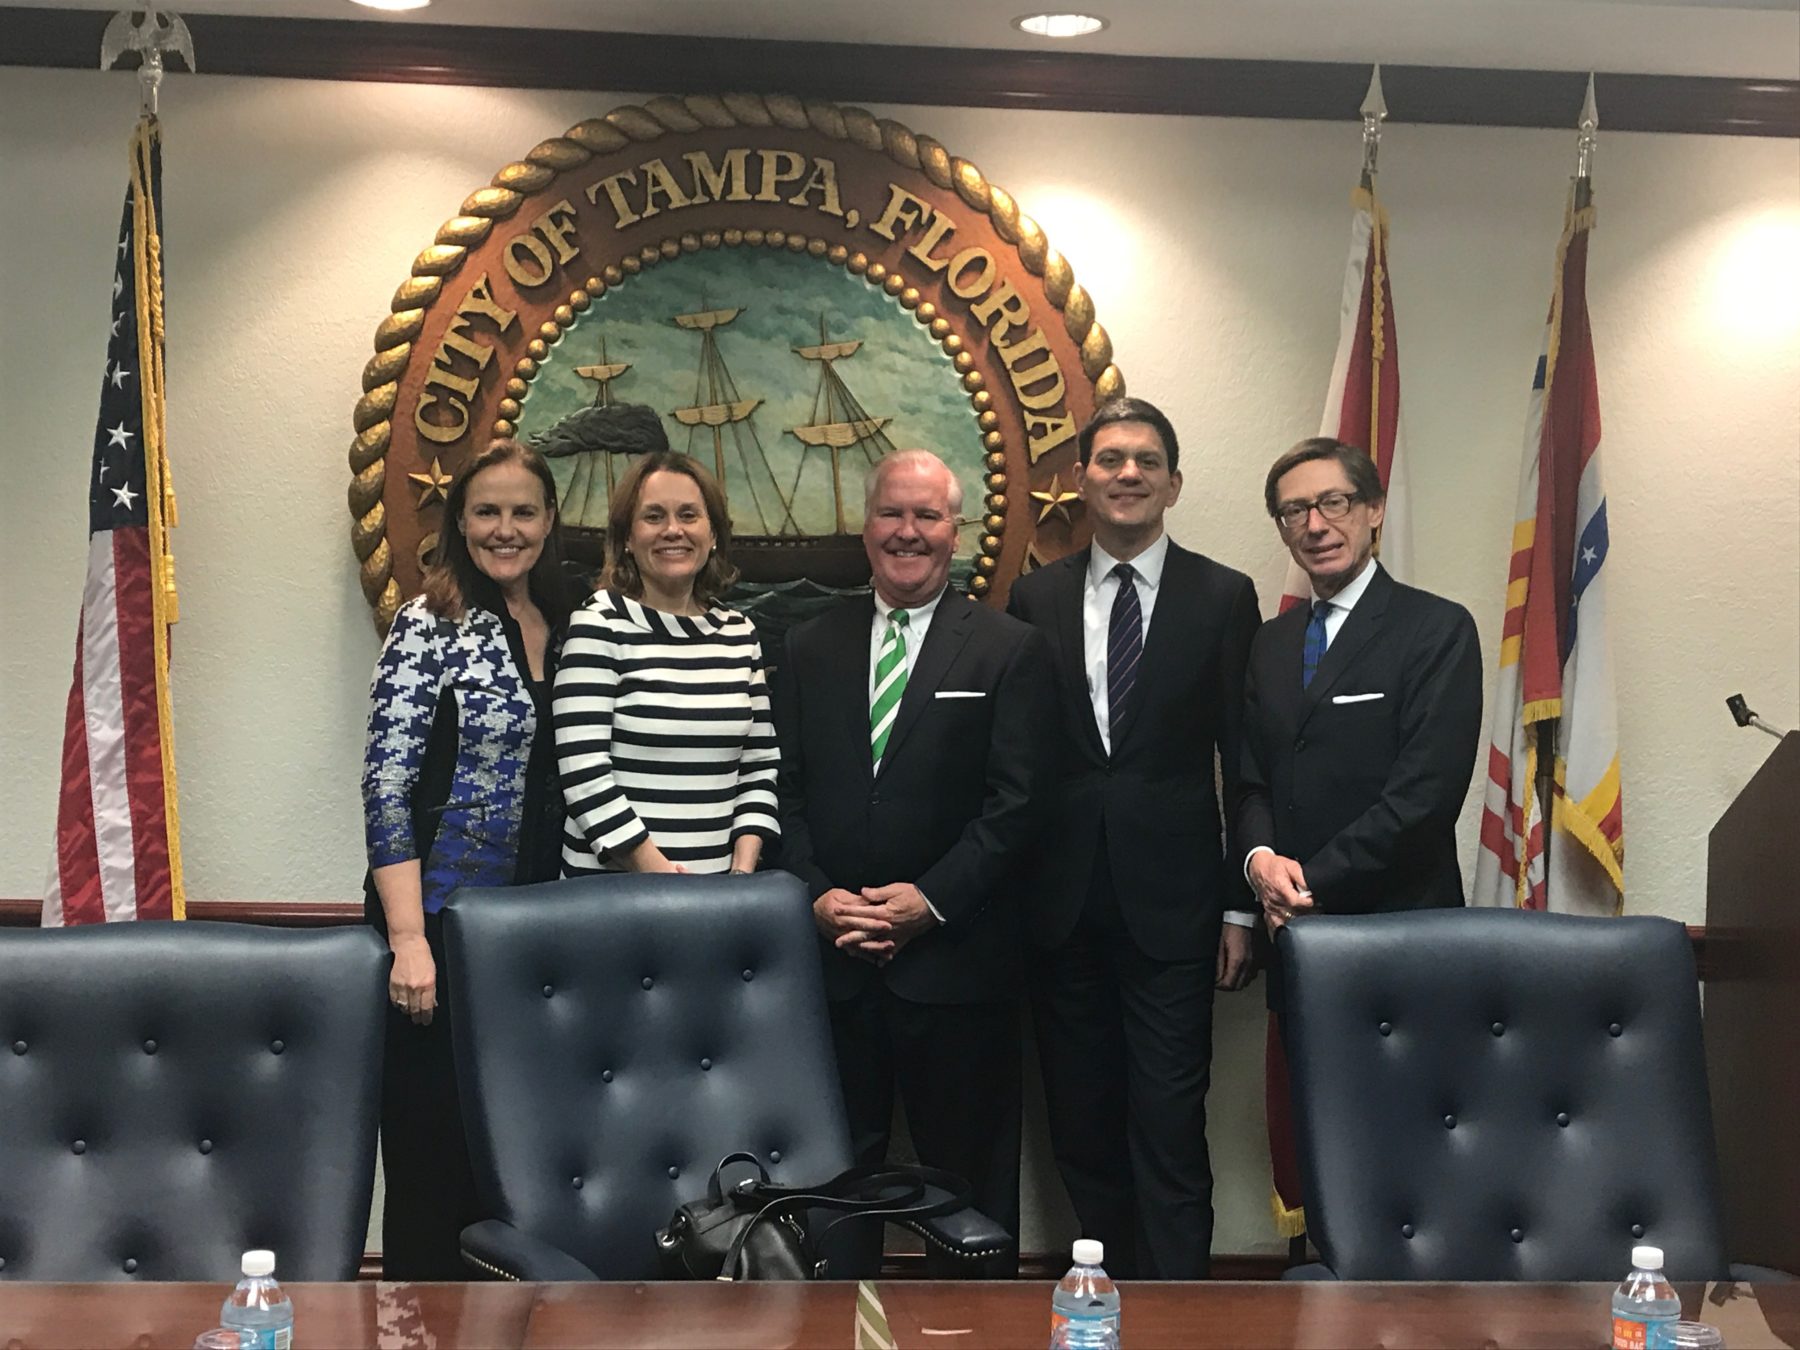 The Honorable Michèle Flournoy, Julianne Smith, the Rt. Hon David Miliband, and Amb Peter Wittig pose for a picture with the Mayor of Tampa, Bob Buckhorn